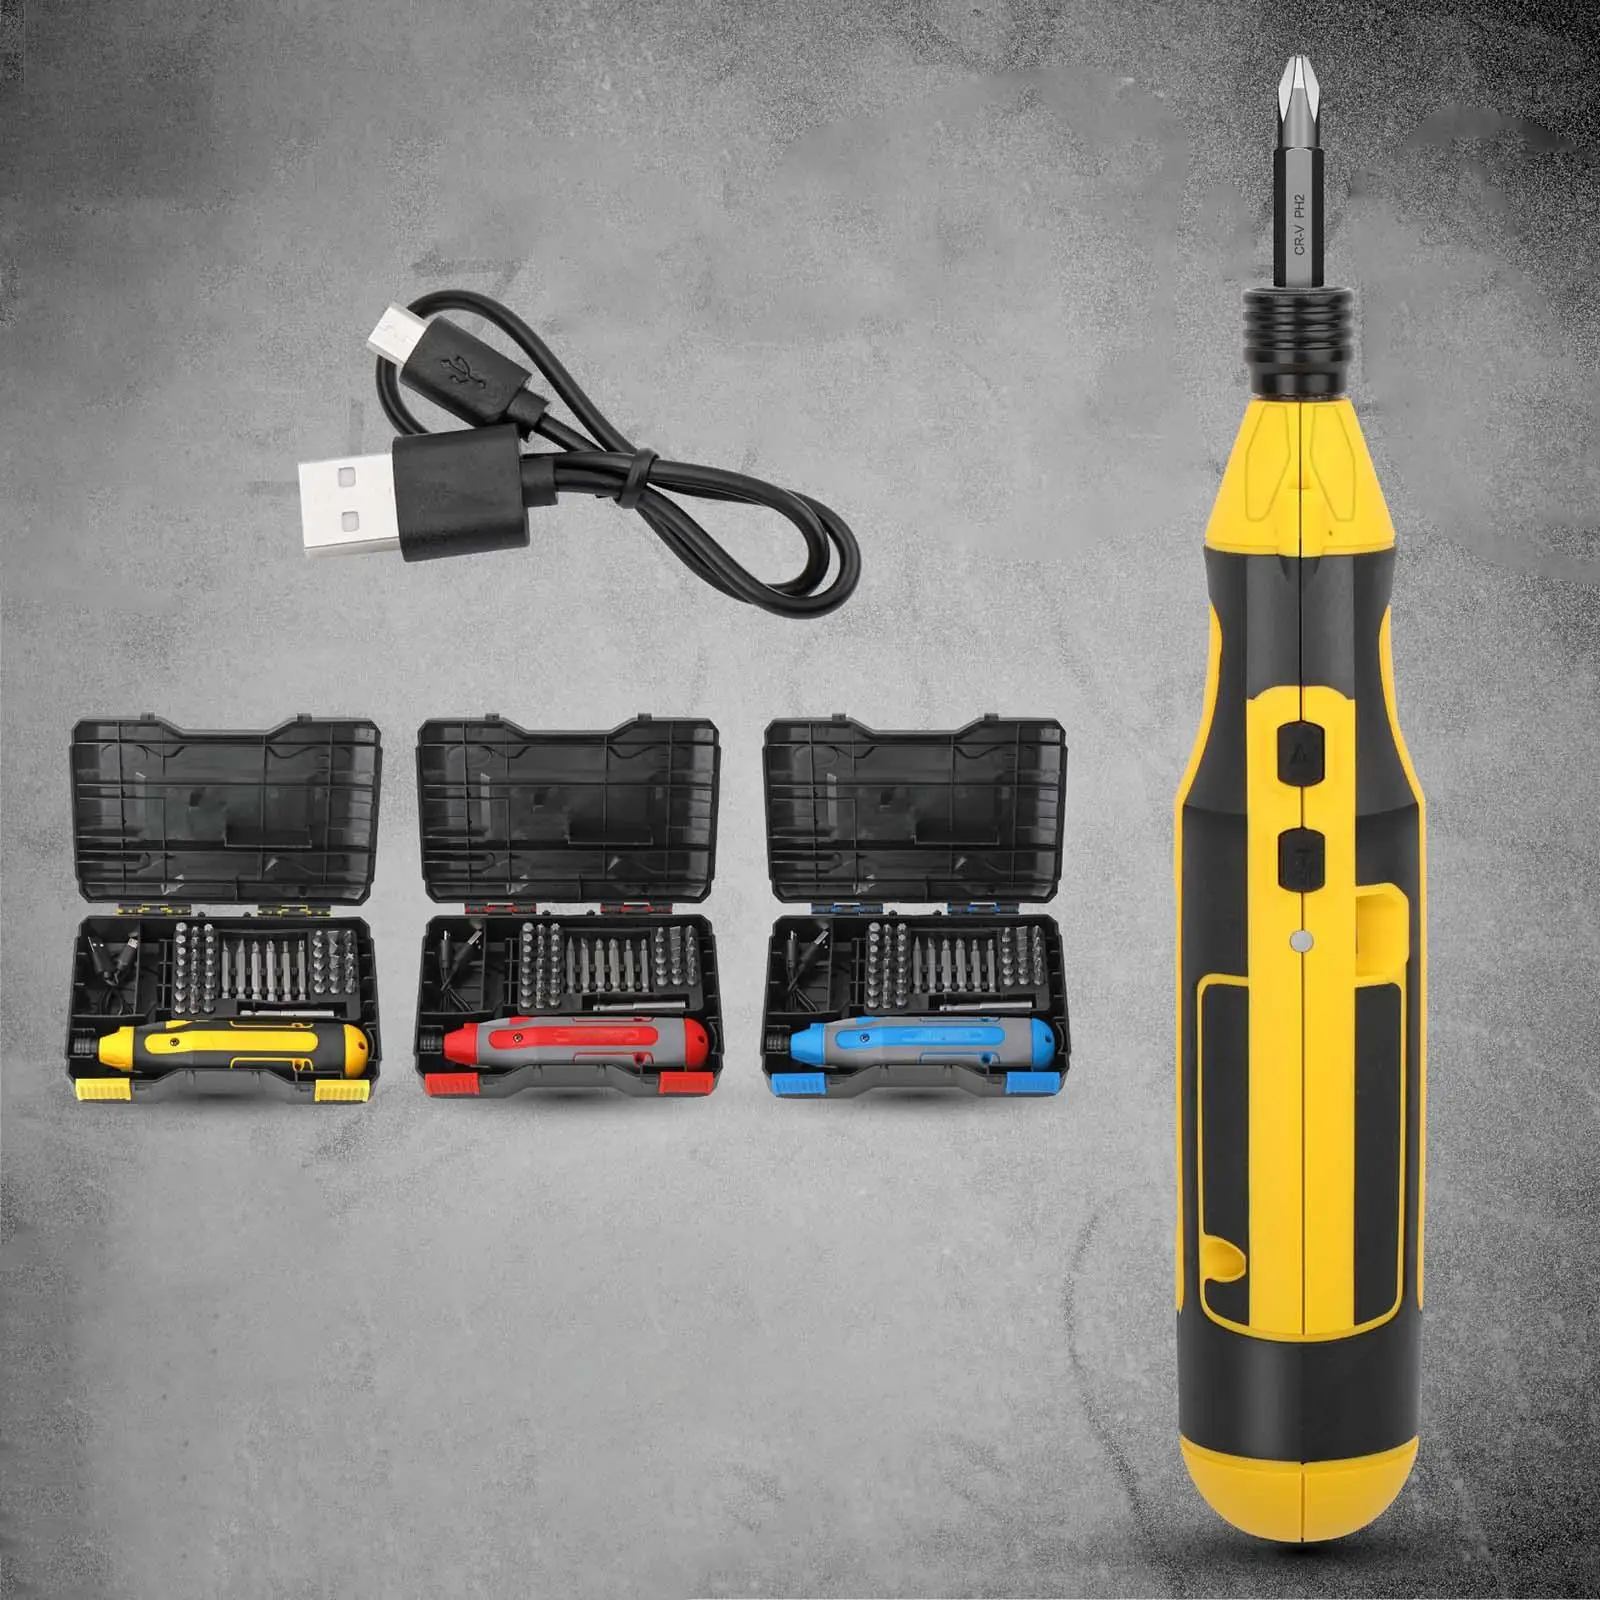 Cordless Electric Screwdriver Kit Manual Repair Tools Maintenance Screwdriver Bits Rechargeable USB 44x for Household Furniture